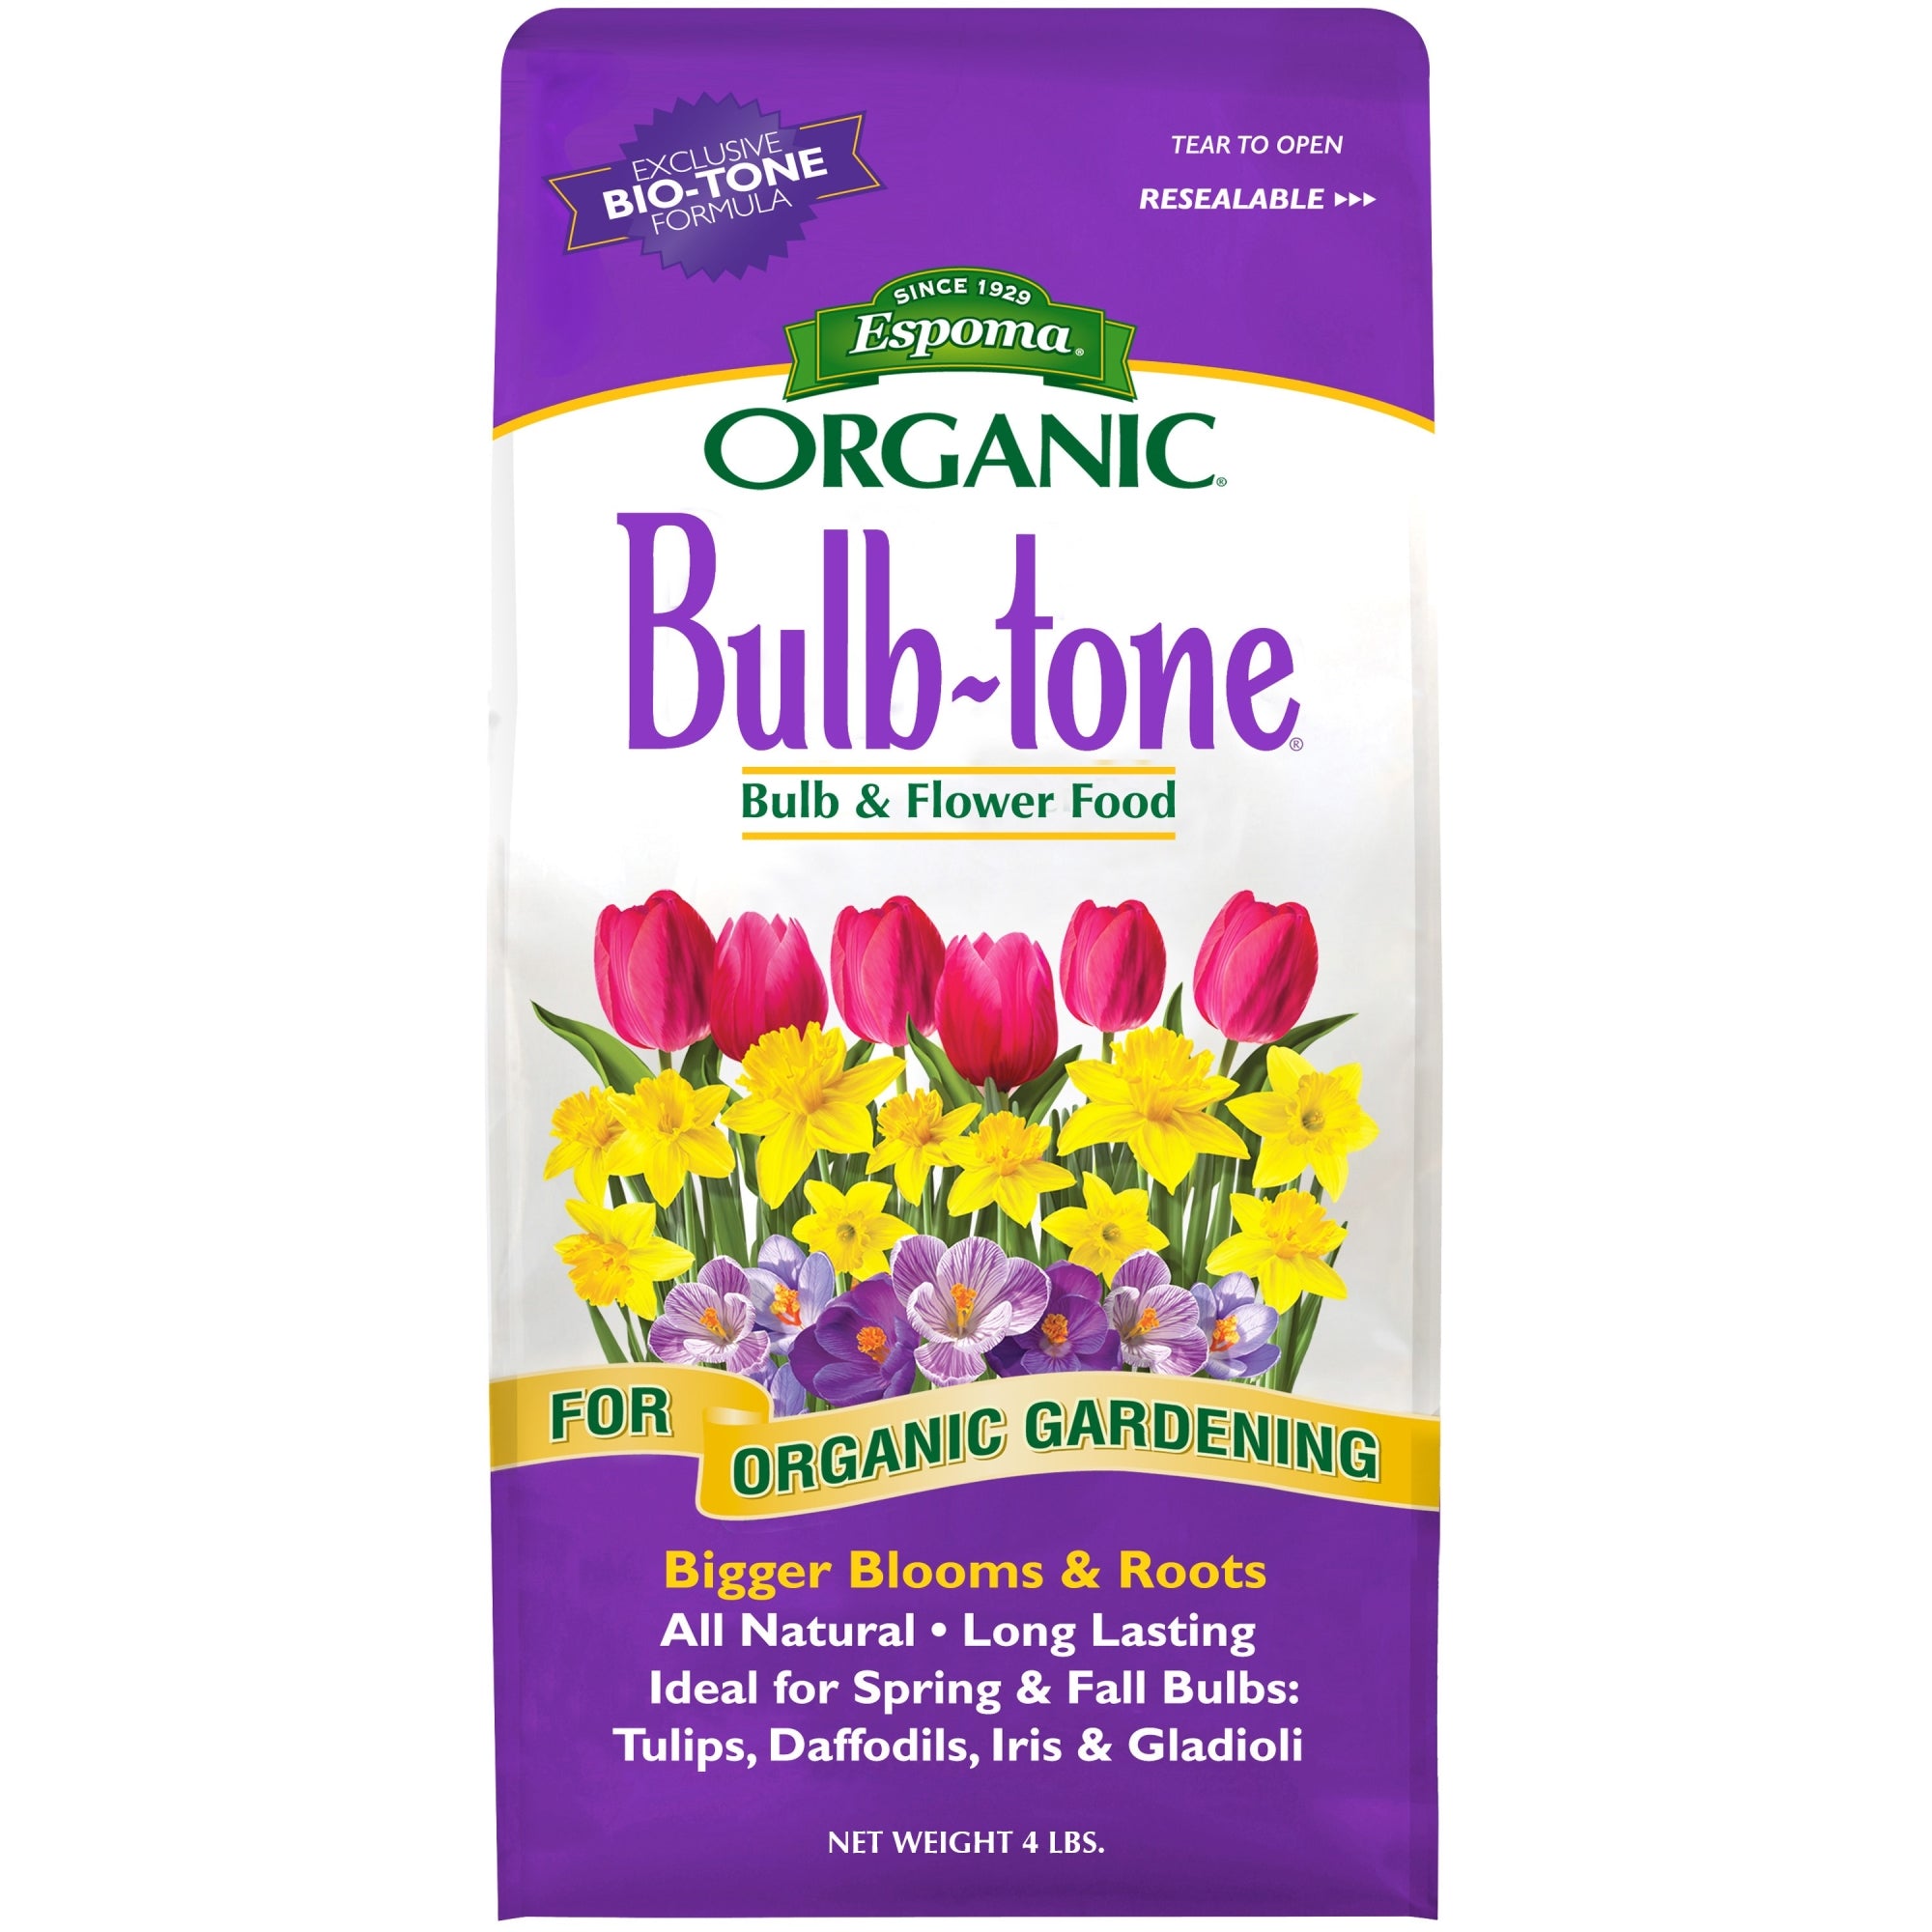 Espoma Organic Bulb-tone 3-5-3 Bulb and Flower Food for Organic Gardening, Bigger Blooms & Roots